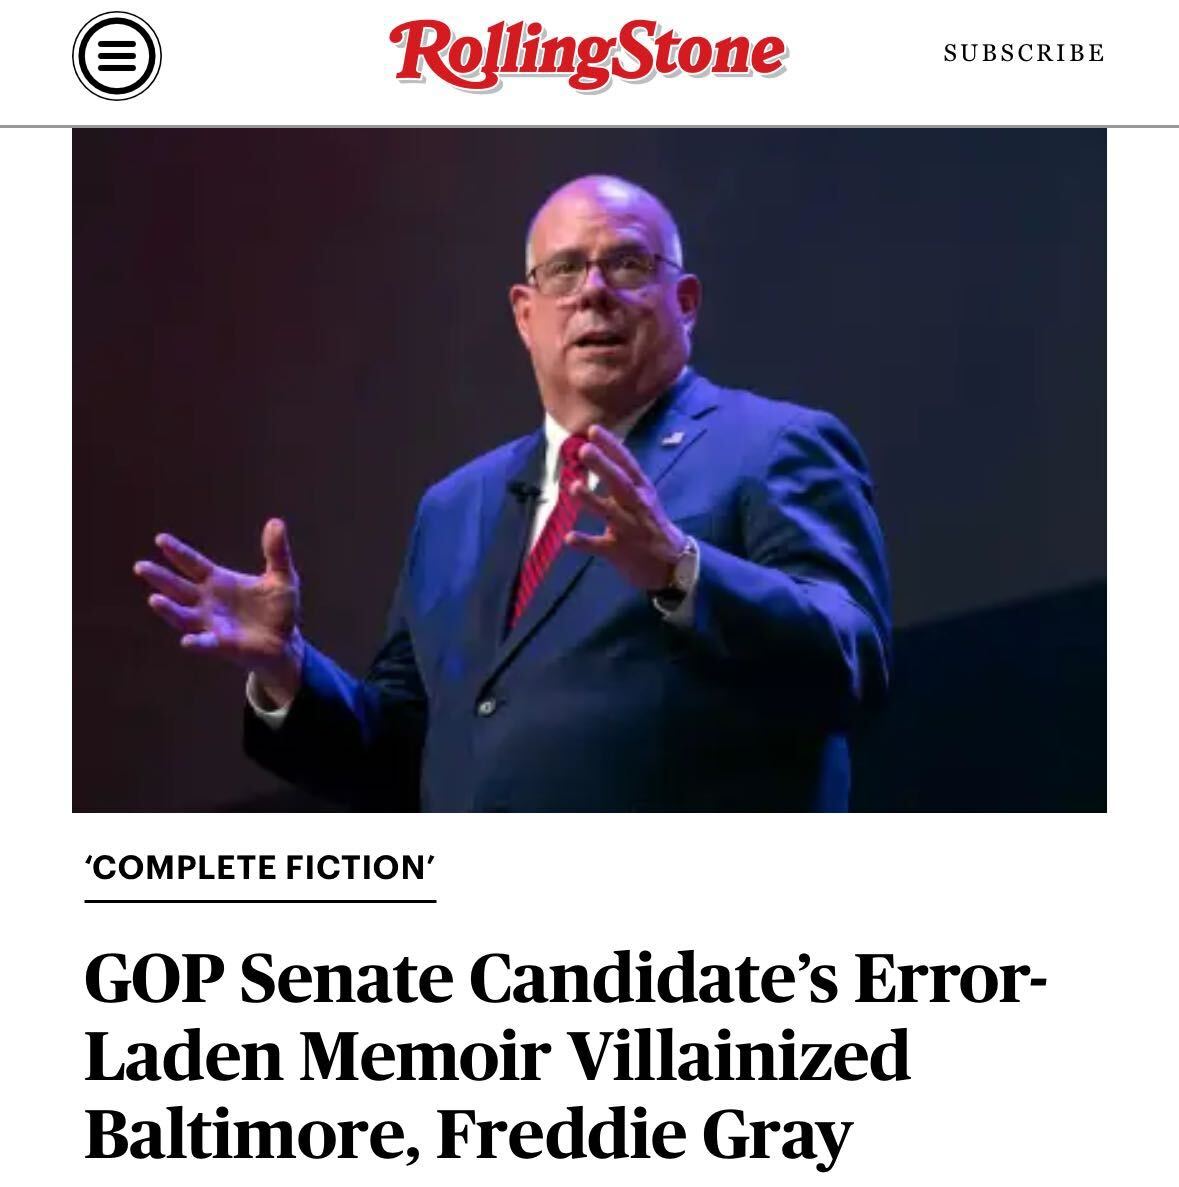 NEW: GOP Senate candidate Larry Hogan, the former Maryland Republican governor, has a moderate reputation — but he spent his career wrongfully demonizing Baltimore and victims of police abuses. Story: rollingstone.com/politics/polit…